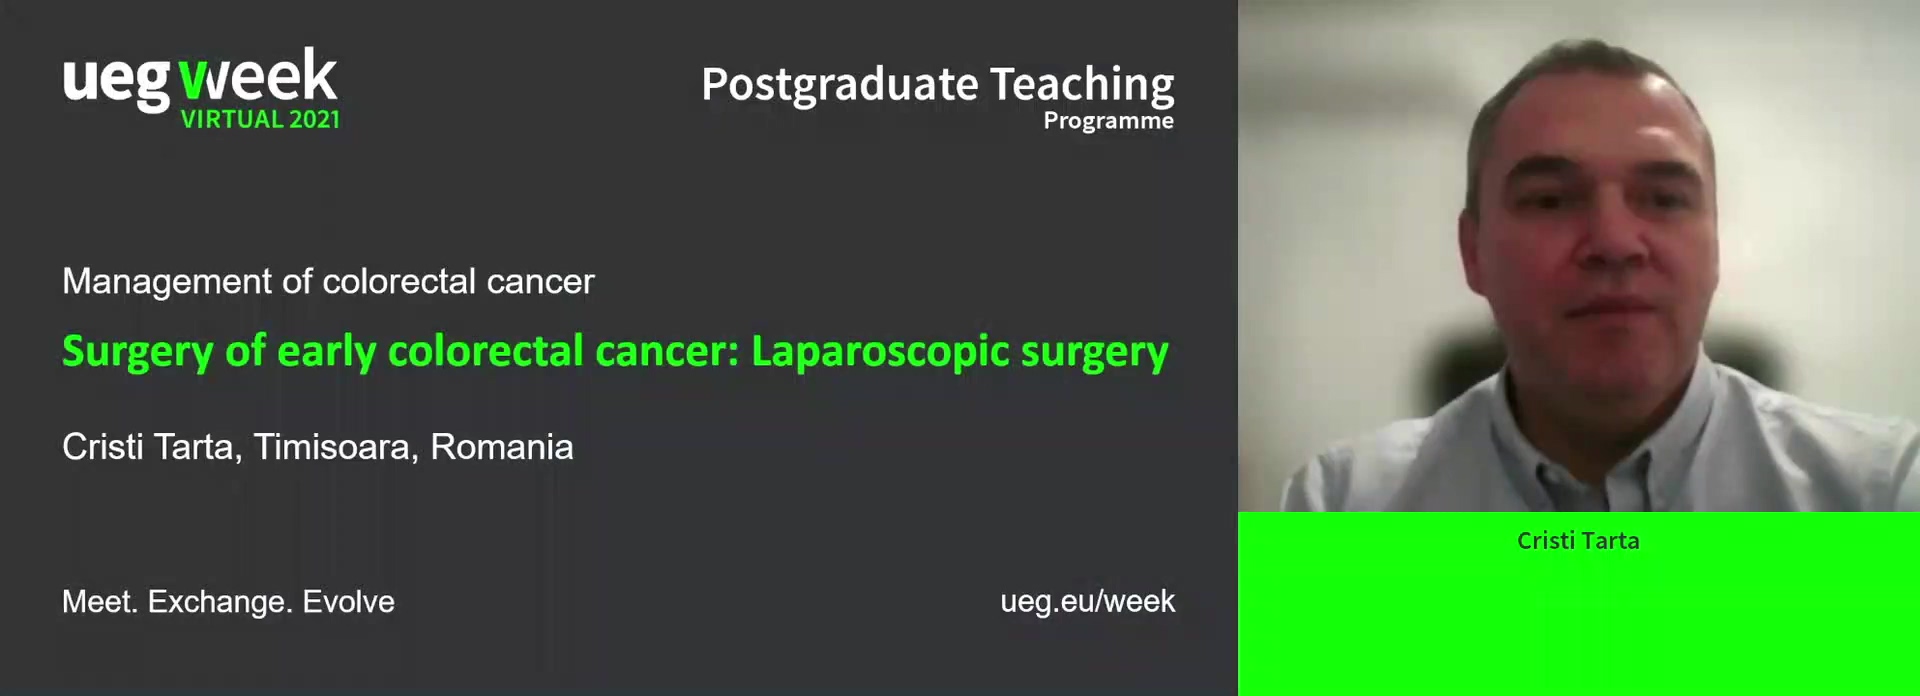 Surgery of early colorectal cancer: Laprascopic surgery